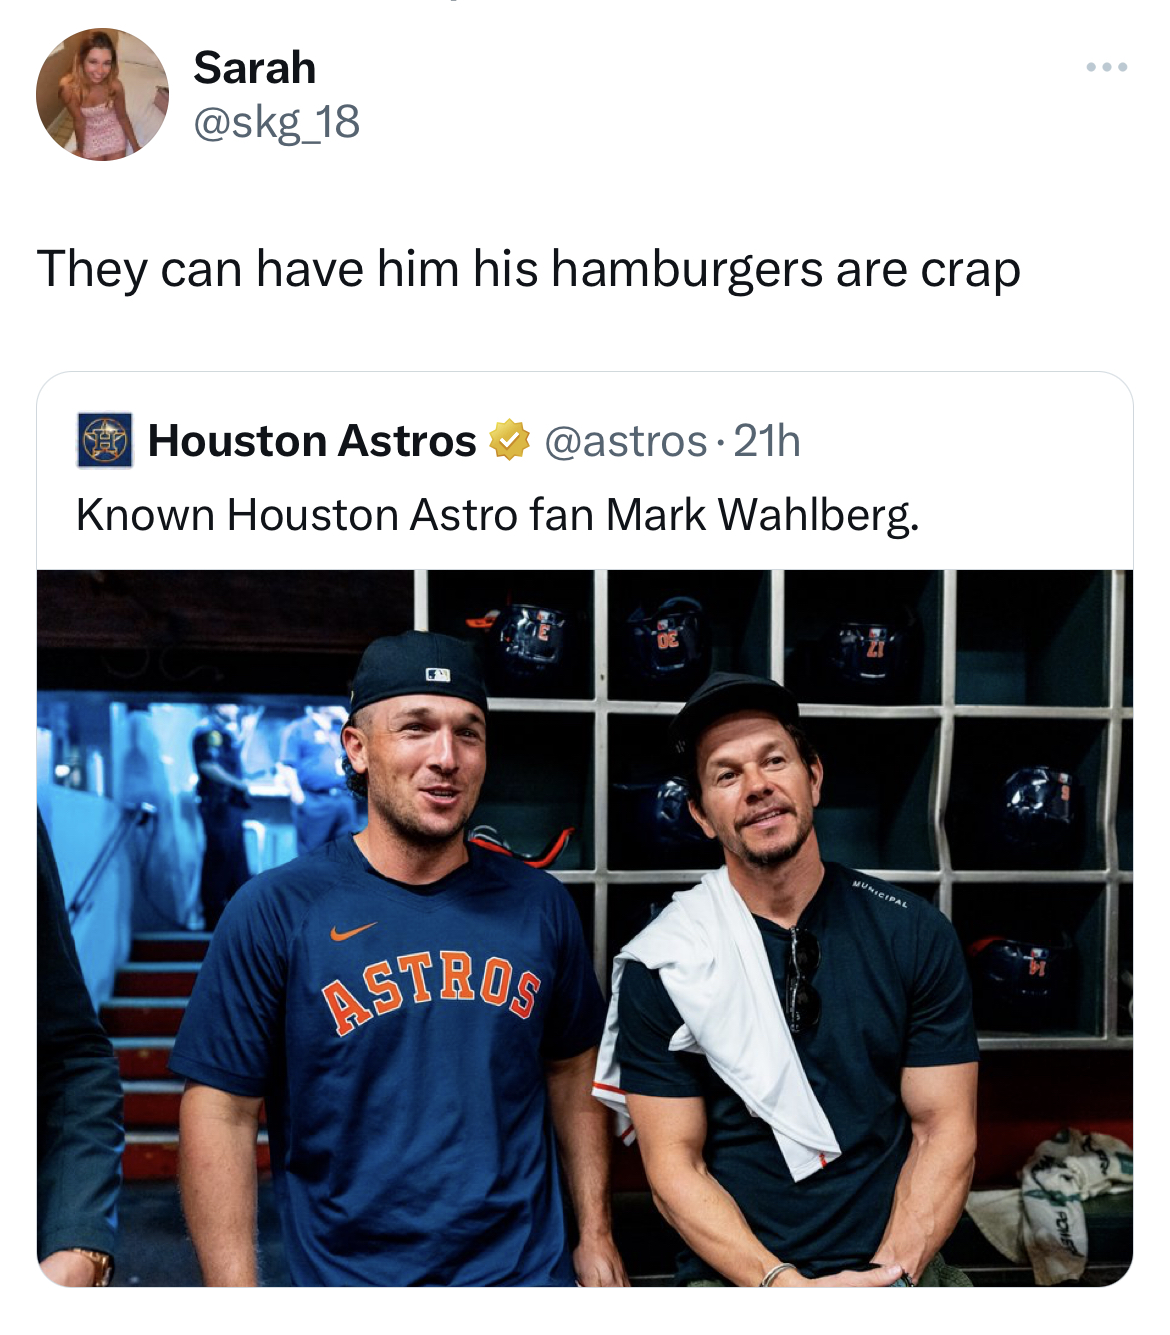 Tweets of the week - t shirt - Sarah They can have him his hamburgers are crap Houston Astros Known Houston Astro fan Mark Wahlberg. Astros "